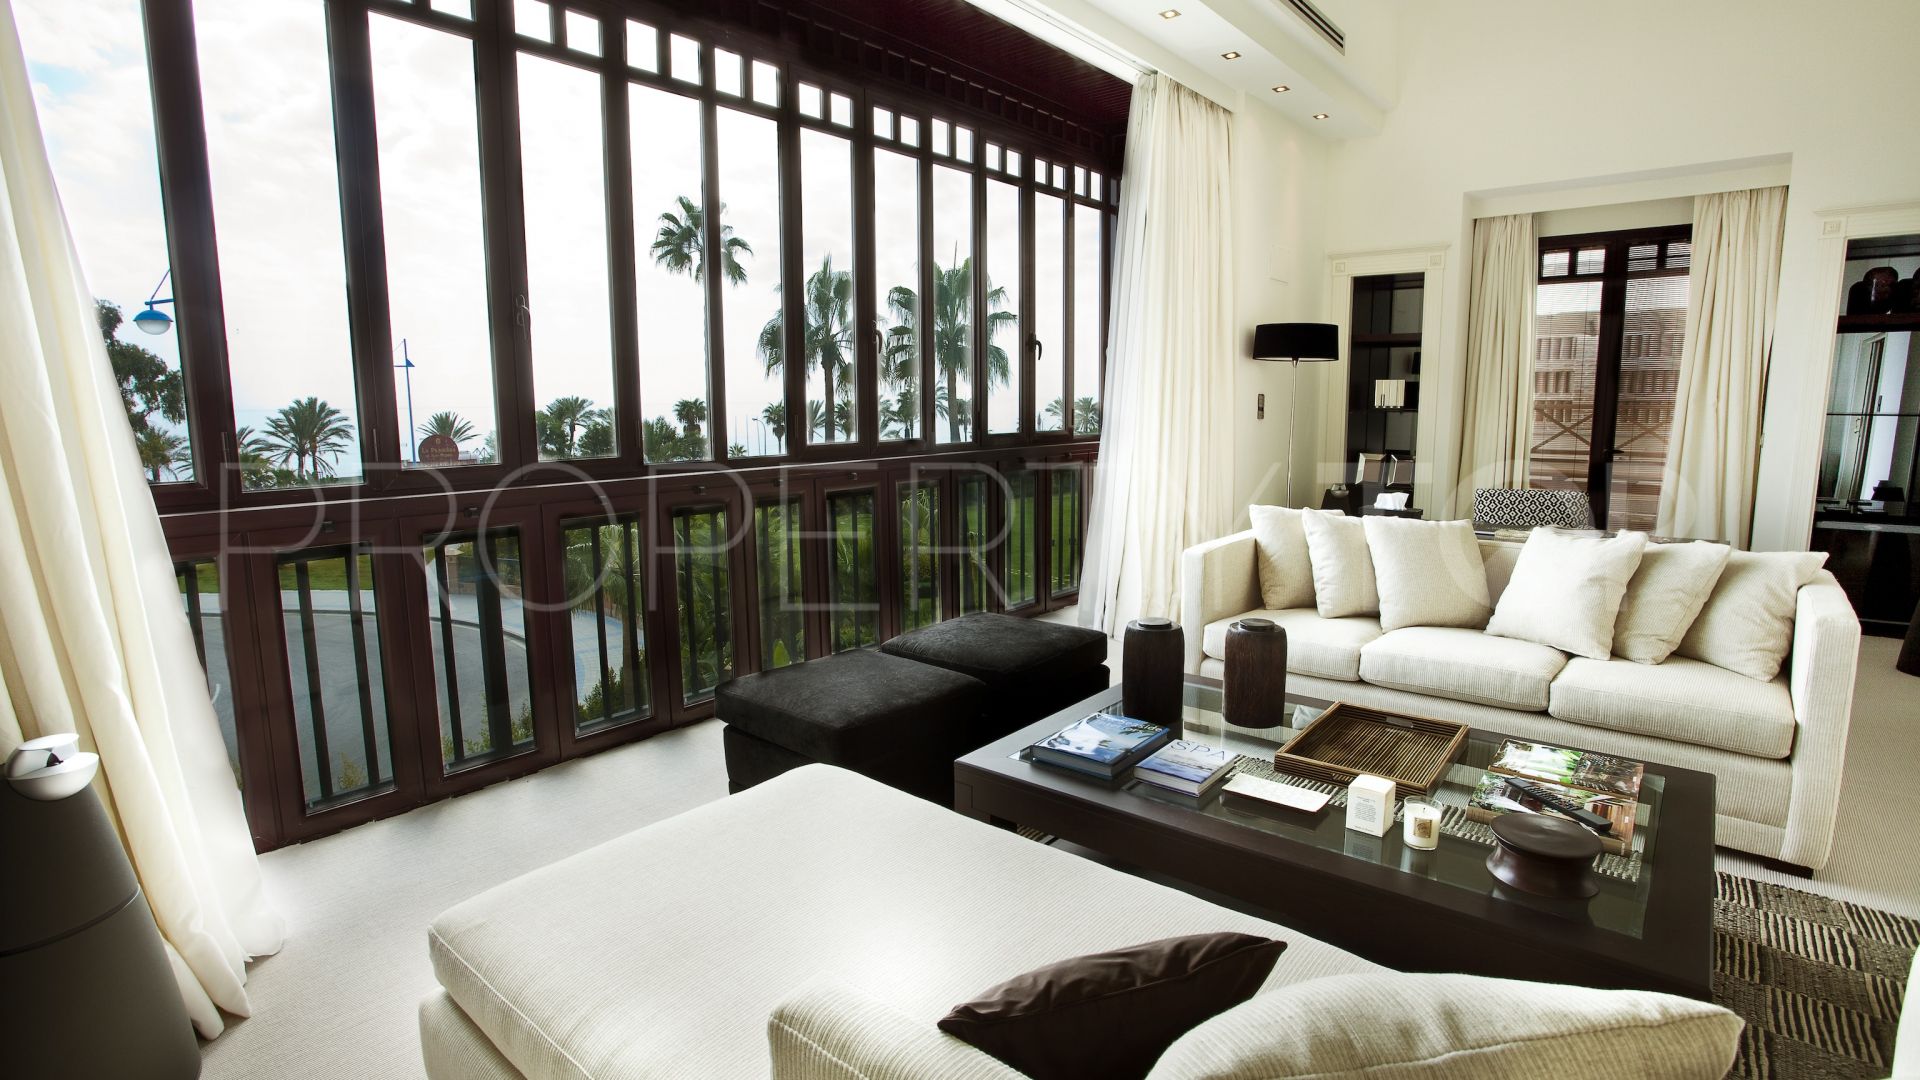 For sale Casablanca Beach semi detached house with 7 bedrooms